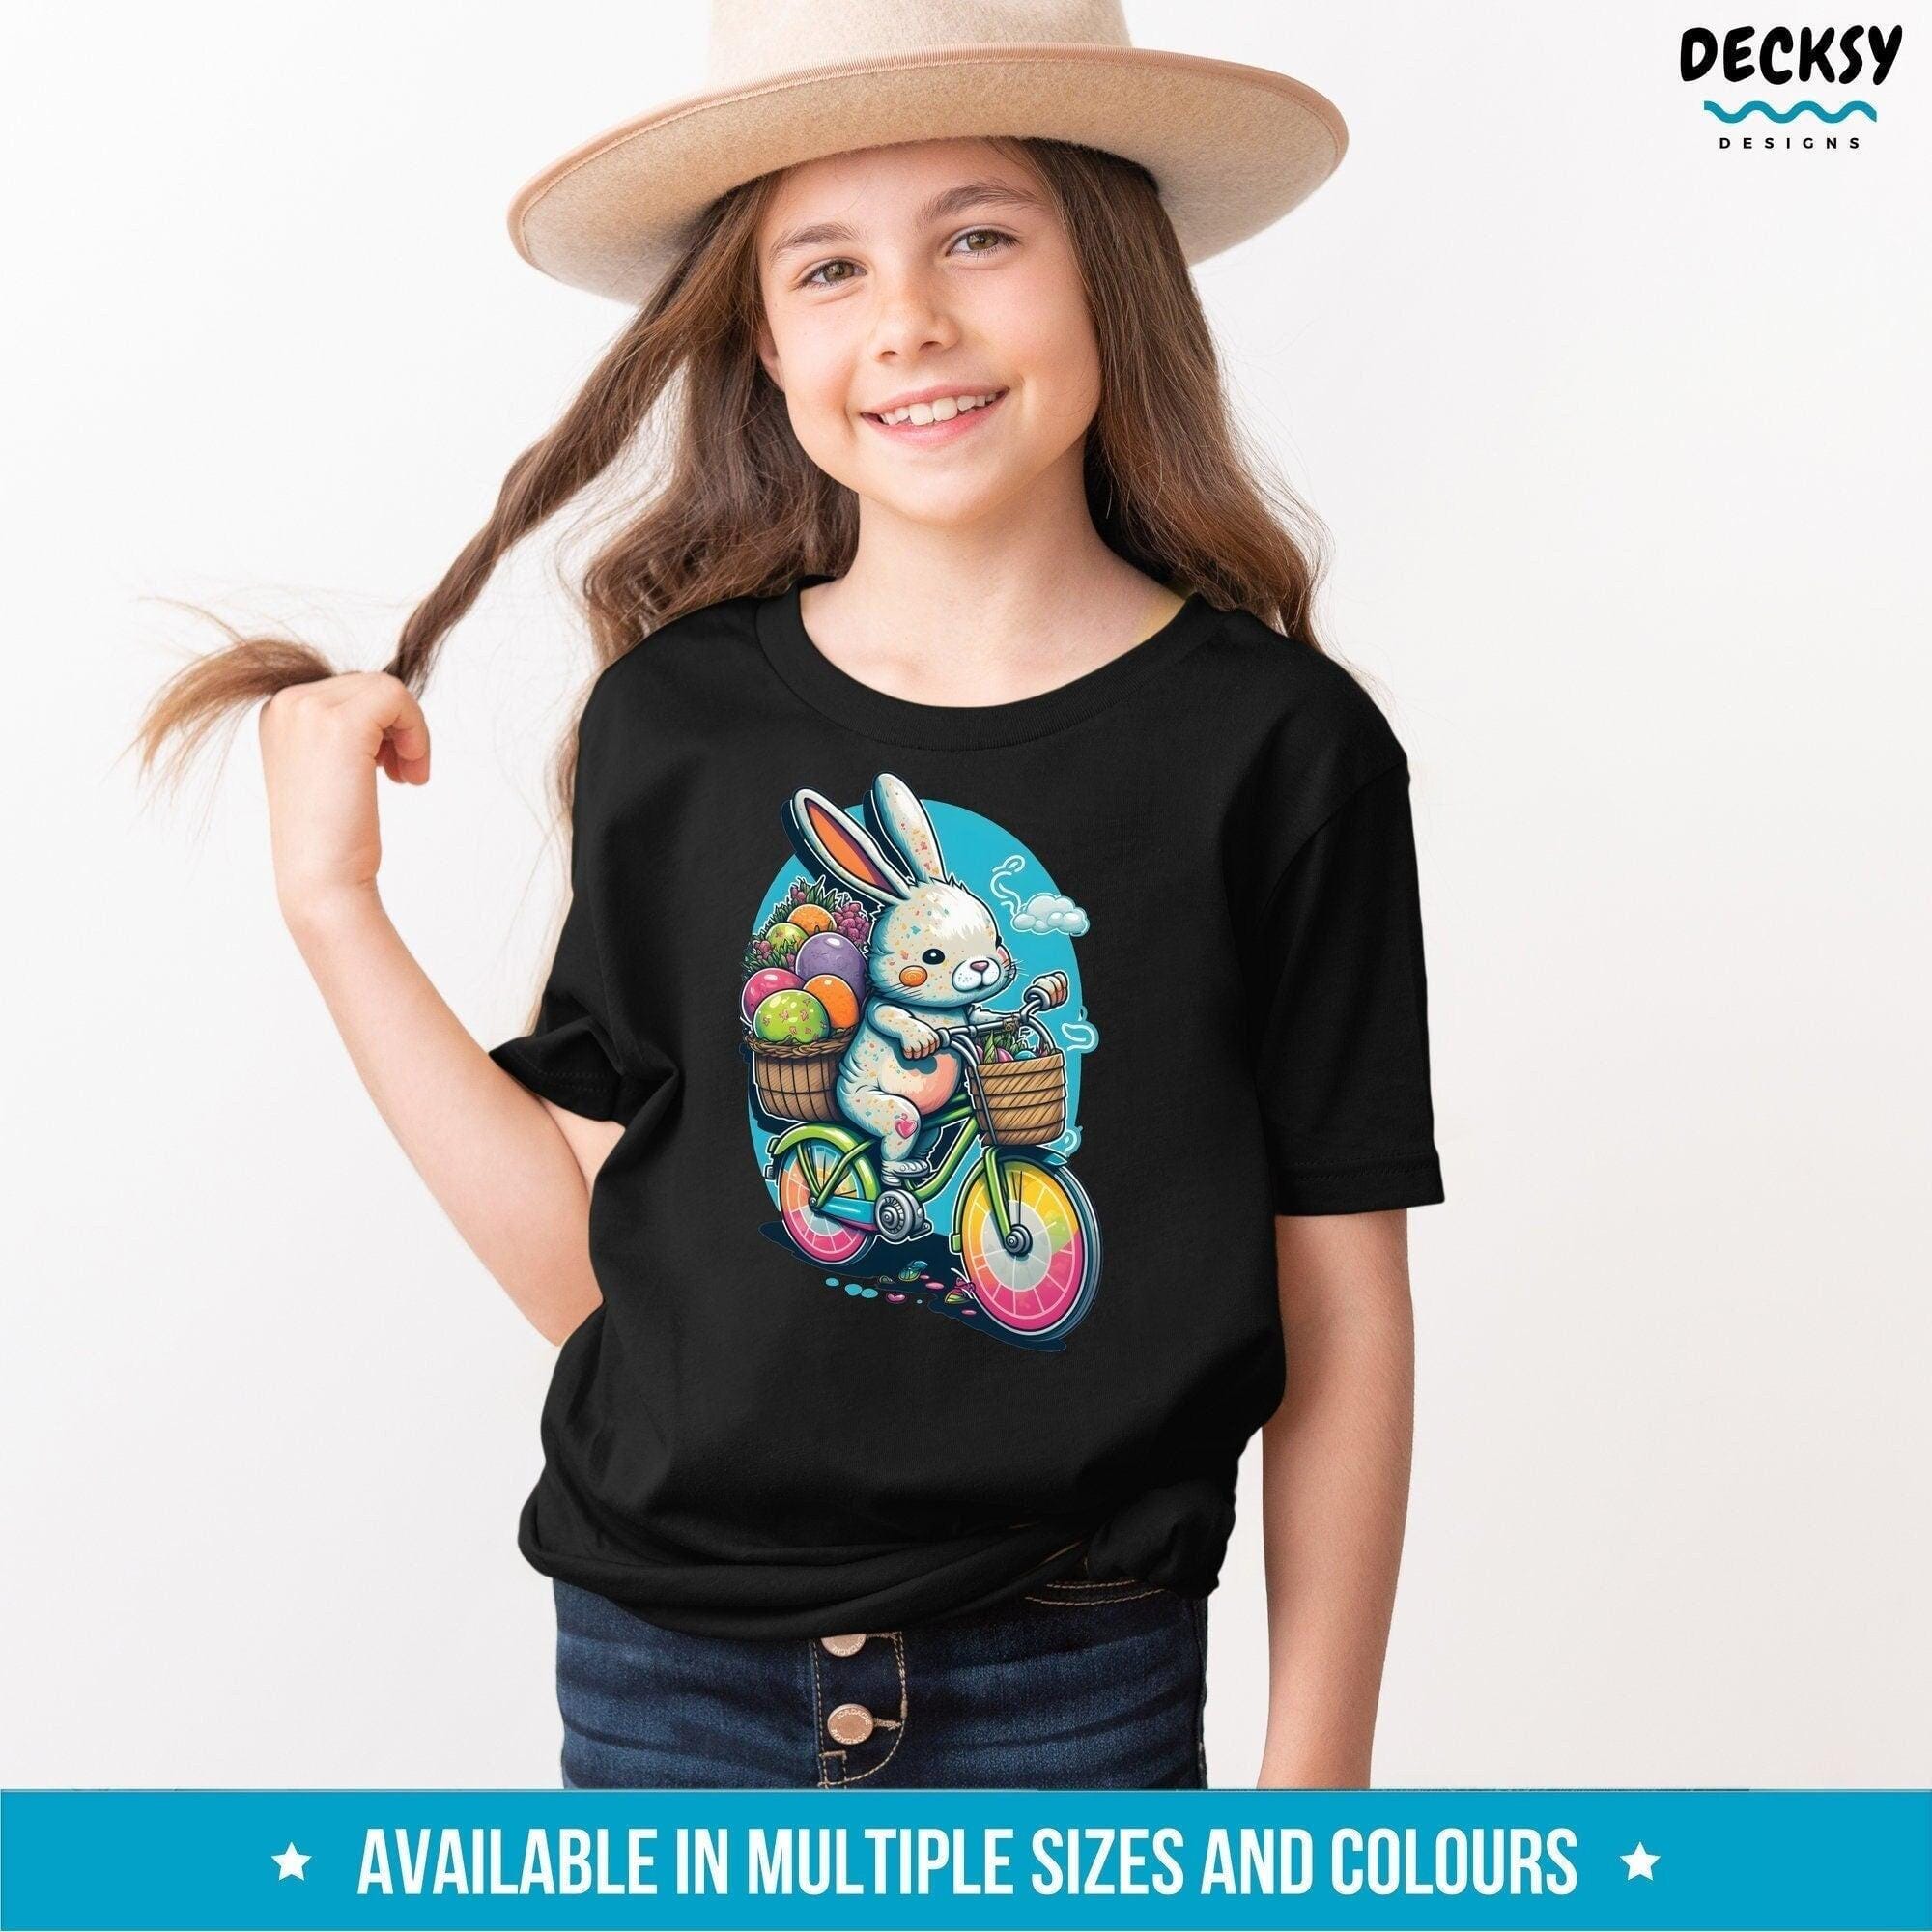 Cute Easter Bunny Tshirt for Kids, Easter Egg Hunt Gift-Clothing:Gender-Neutral Adult Clothing:Tops & Tees:T-shirts:Graphic Tees-DecksyDesigns